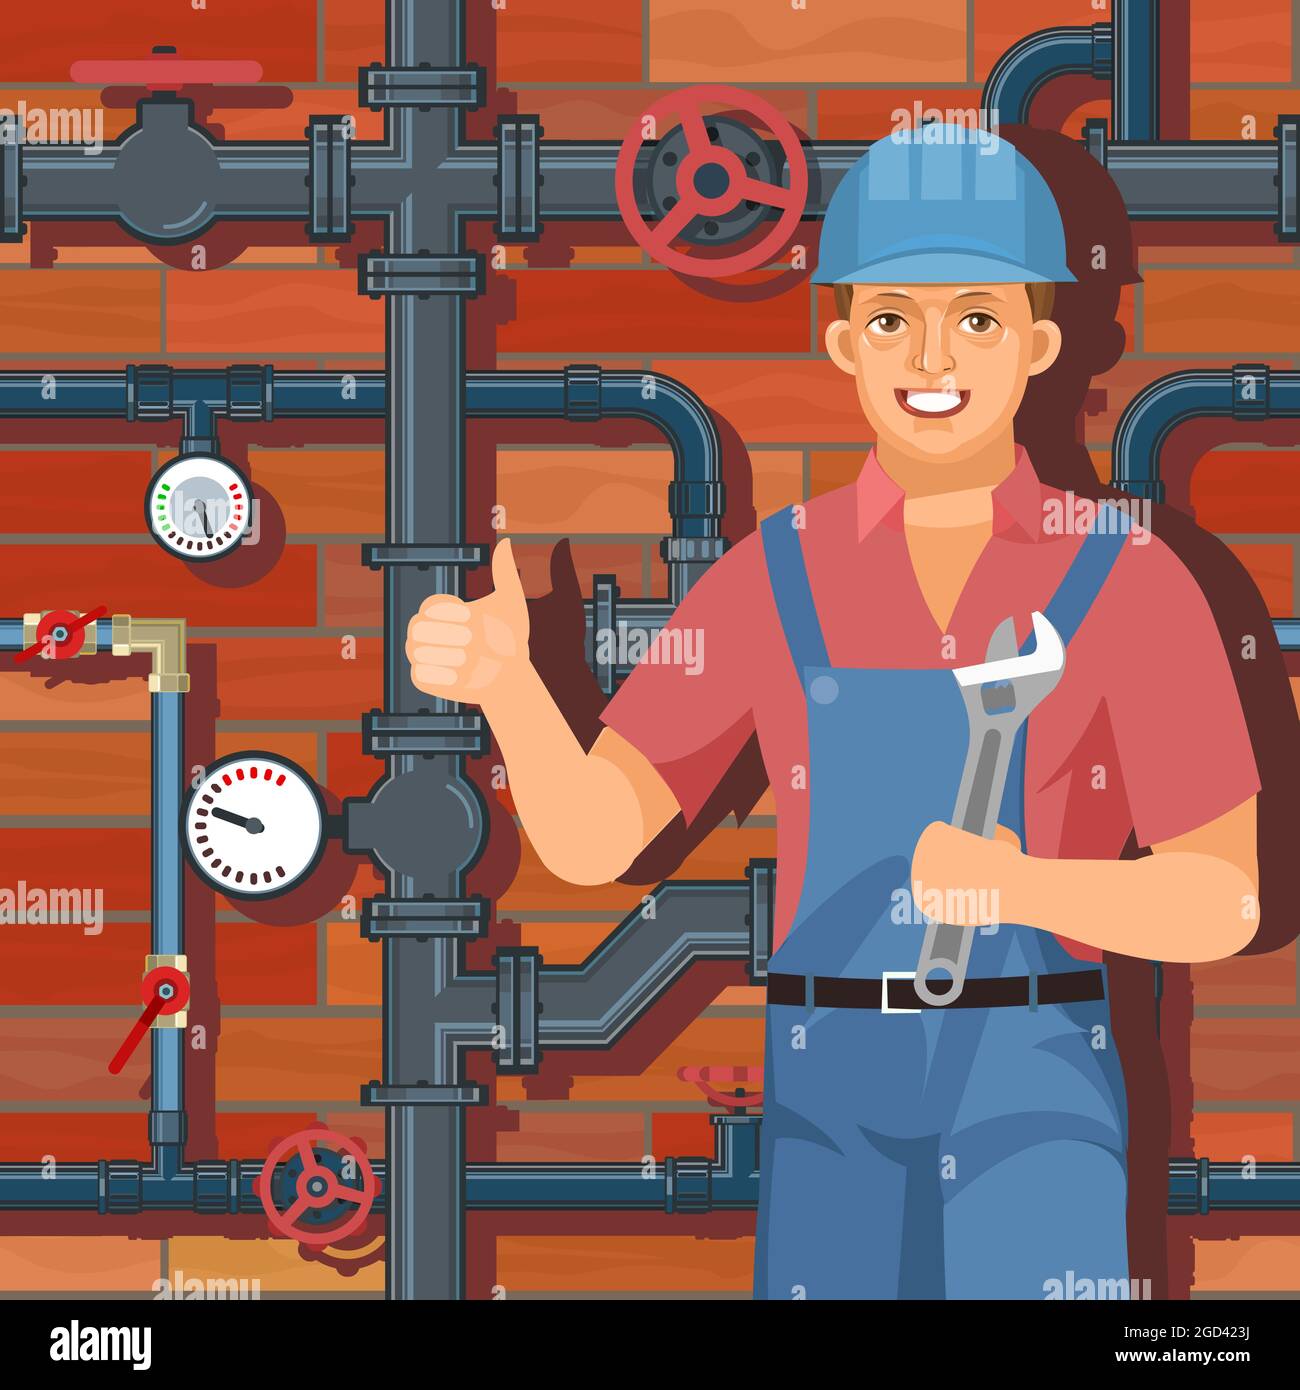 Service for Repair and installation. Water fittings. Pipeline for various purposes. Worker in uniform. Illustration vector. Stock Vector